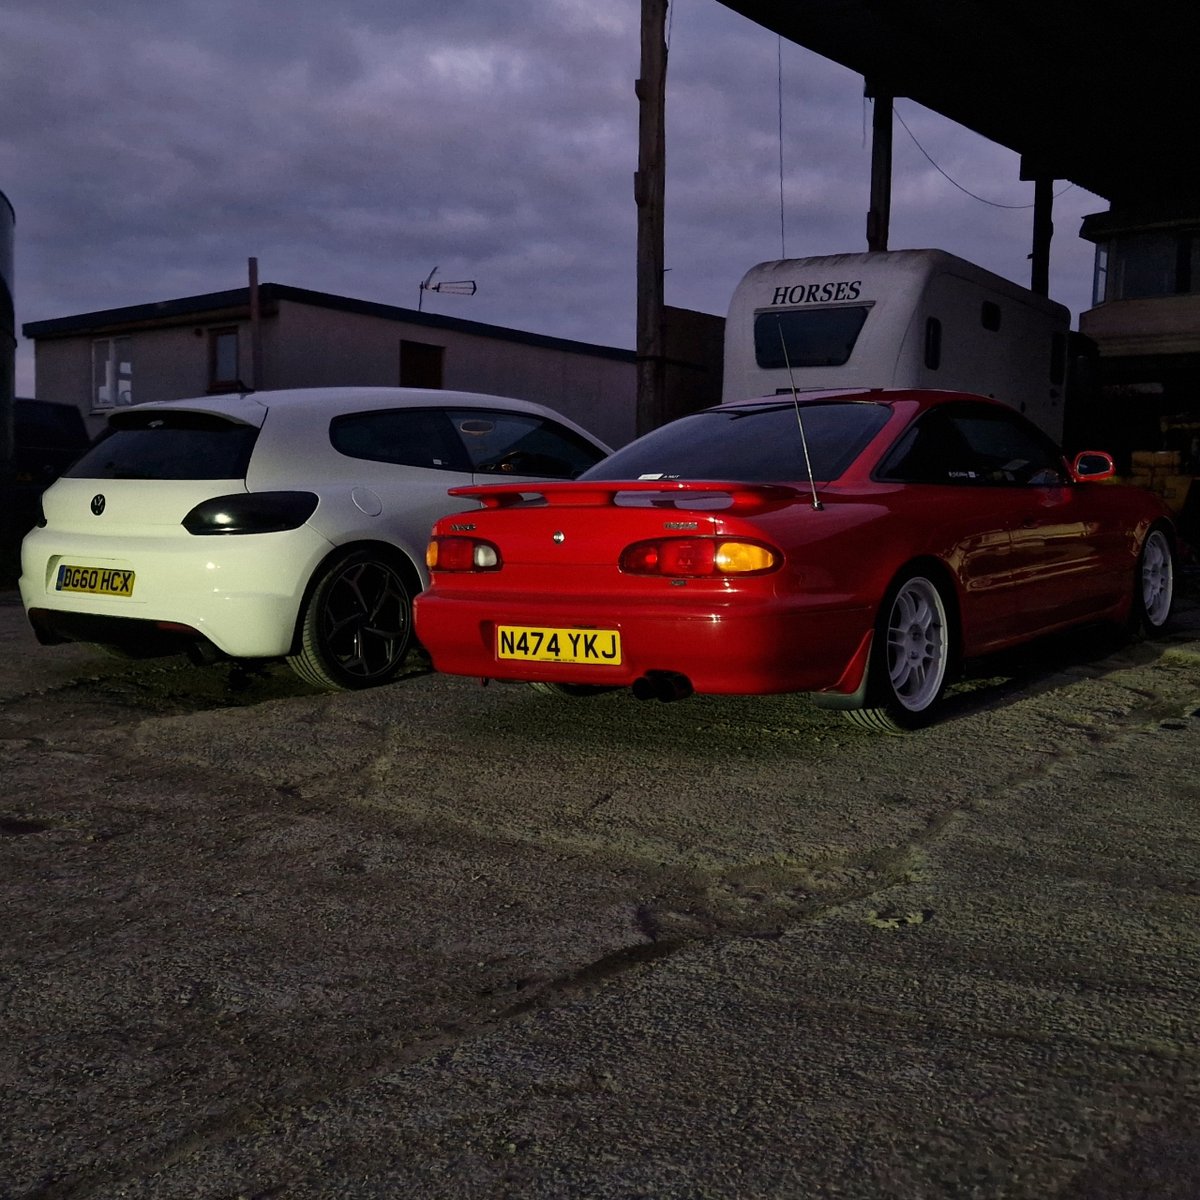 As the day winds down, our Mazda MX6 cosies up for the night, parked next to a previous customer's VW Sirocco, a reminder of the thrill we shared when we sold it to him! 😌🌙

#MazdaMX6 #CarLove #DreamCar #CarEnthusiast #GarageLife #VWScirocco #CustomerSatisfaction #customcars